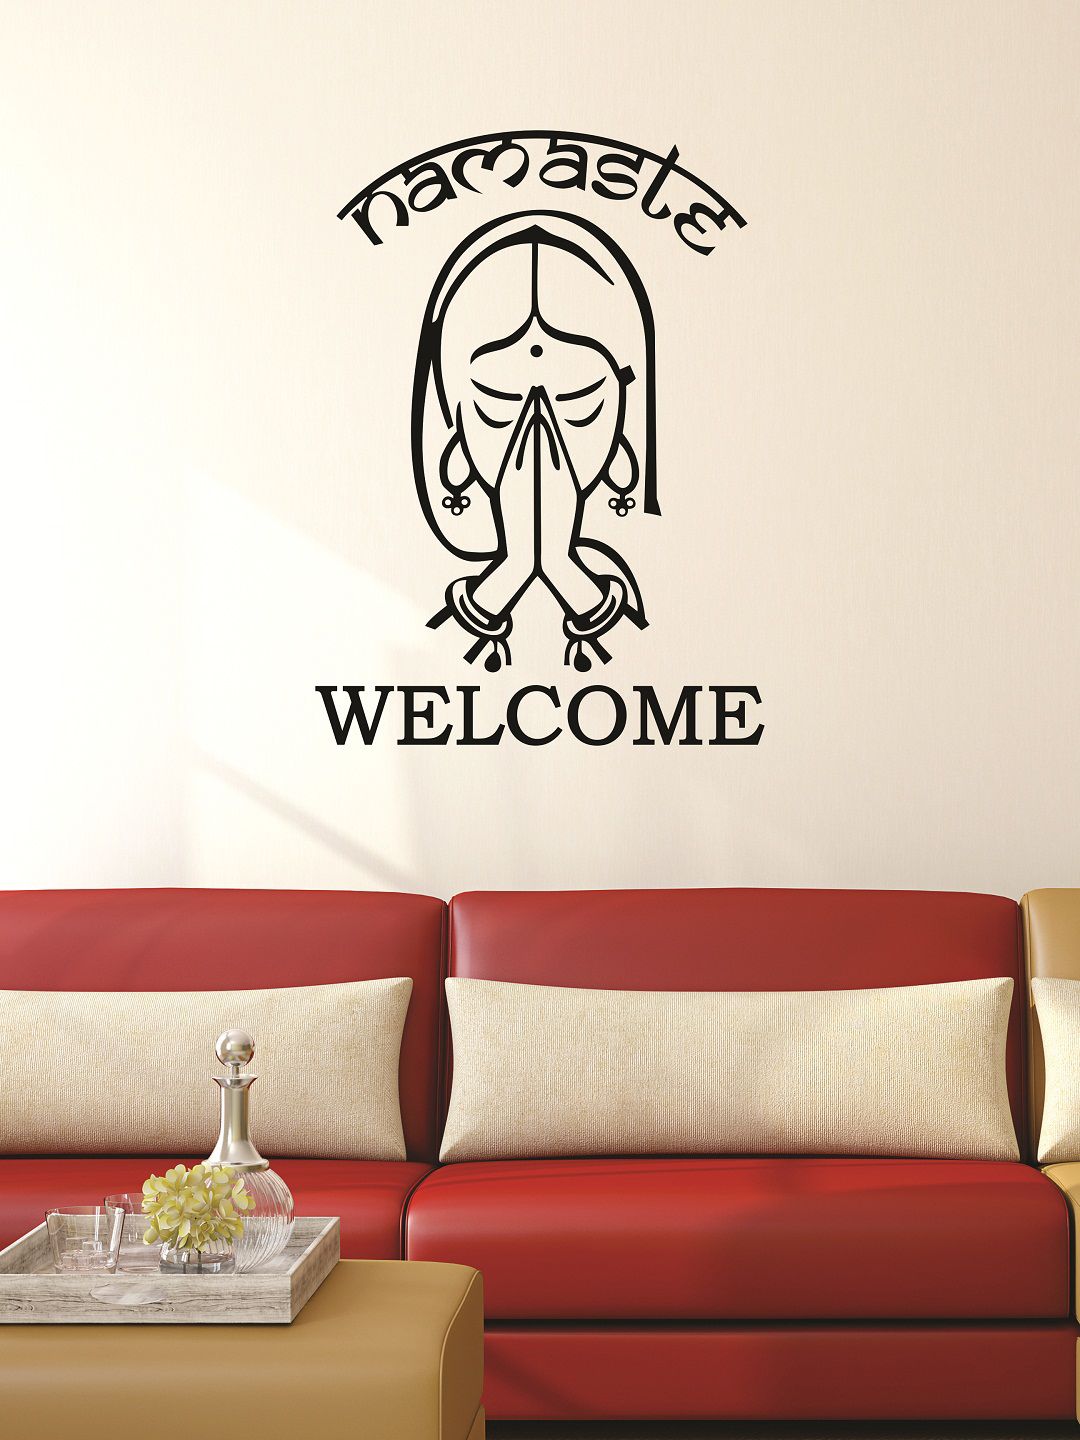 WALLSTICK Black Welcome Large Vinyl Wall Sticker Price in India